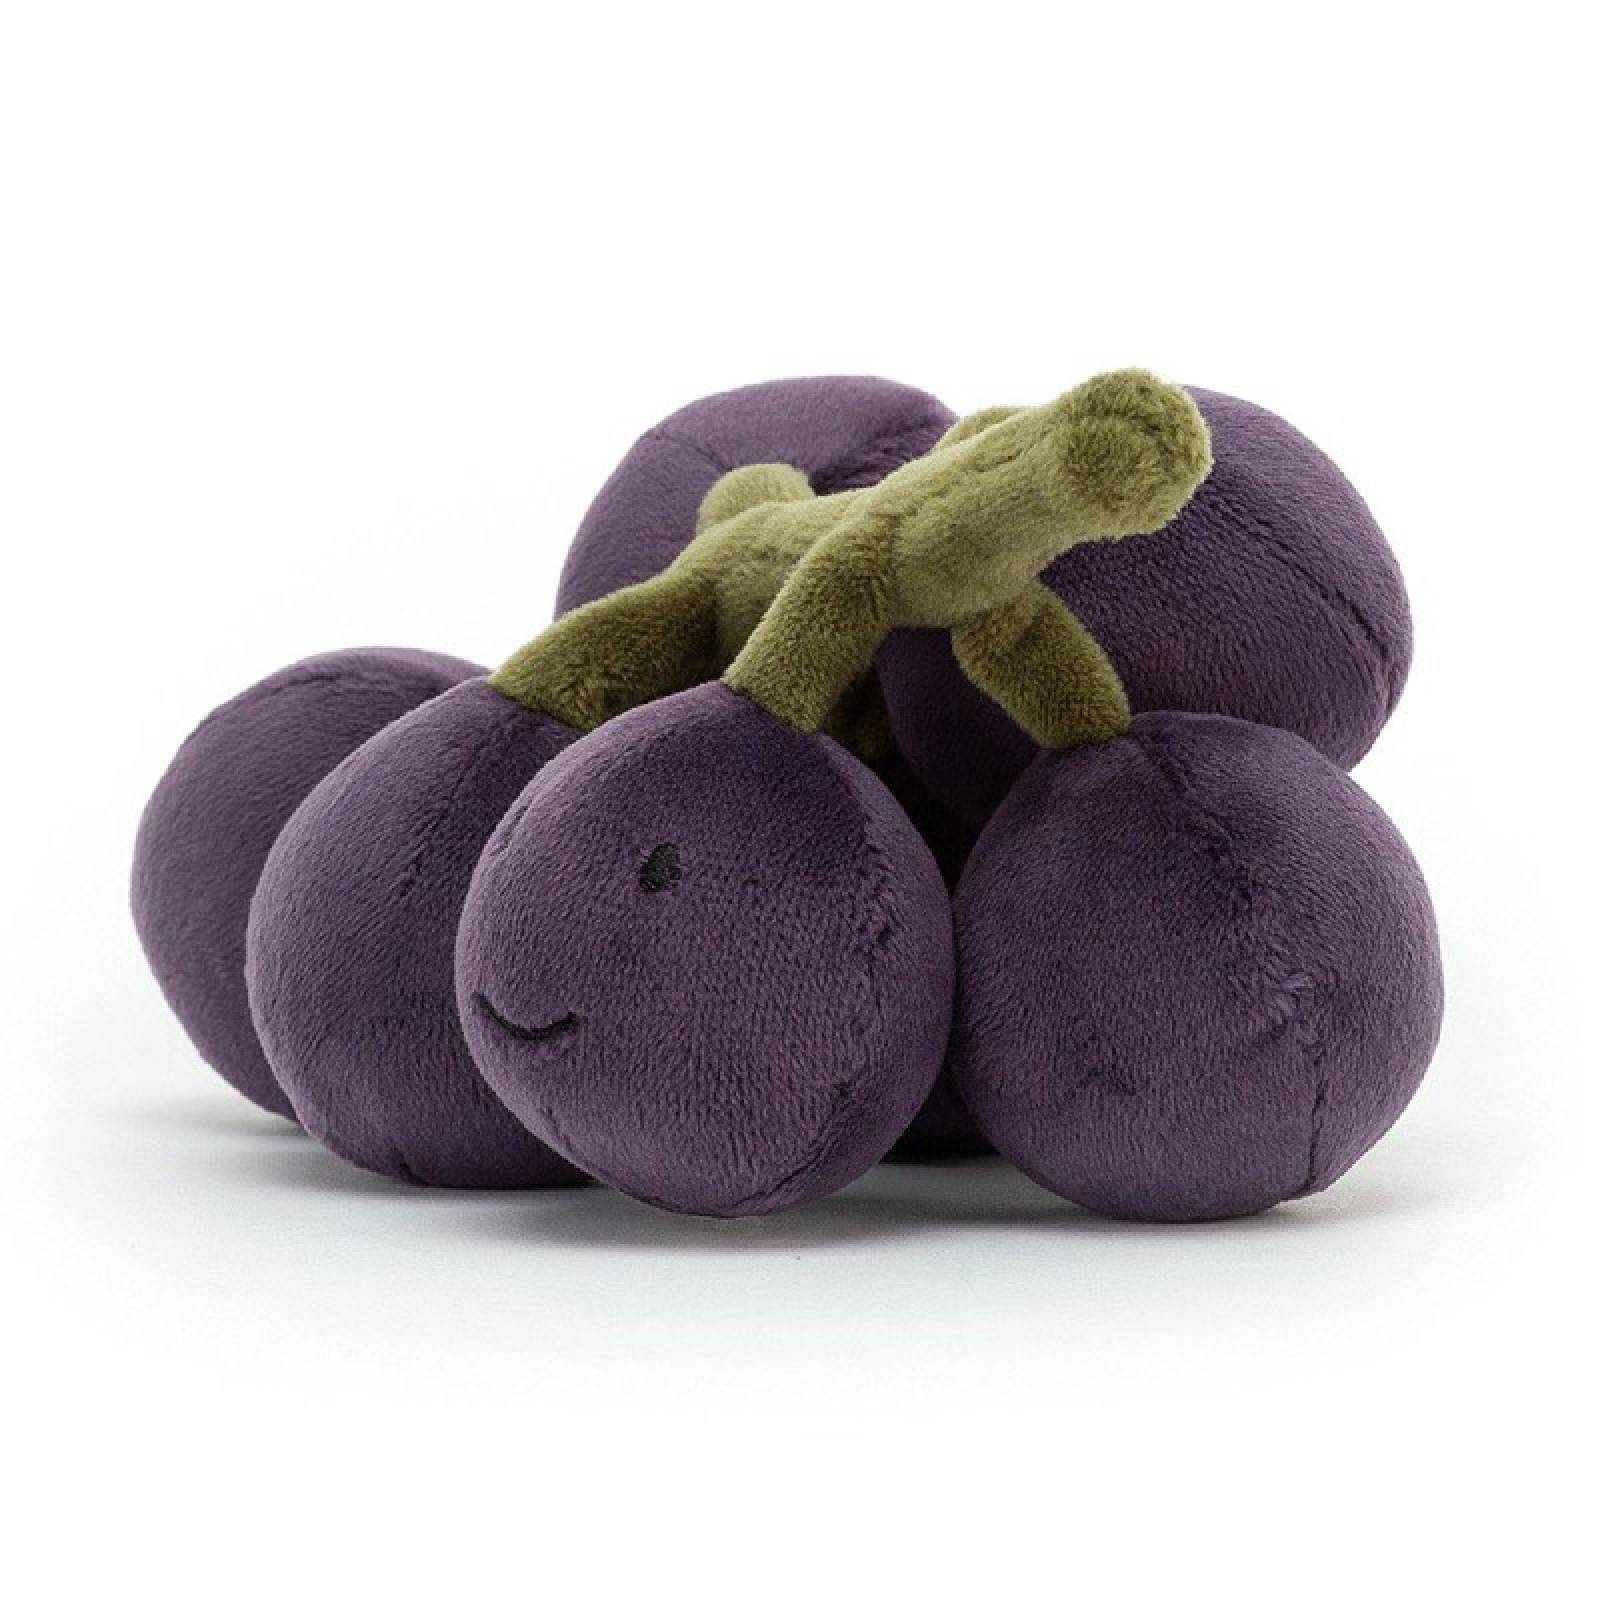 Fabulous Fruit Grapes Soft Toy By Jellycat thumbnails